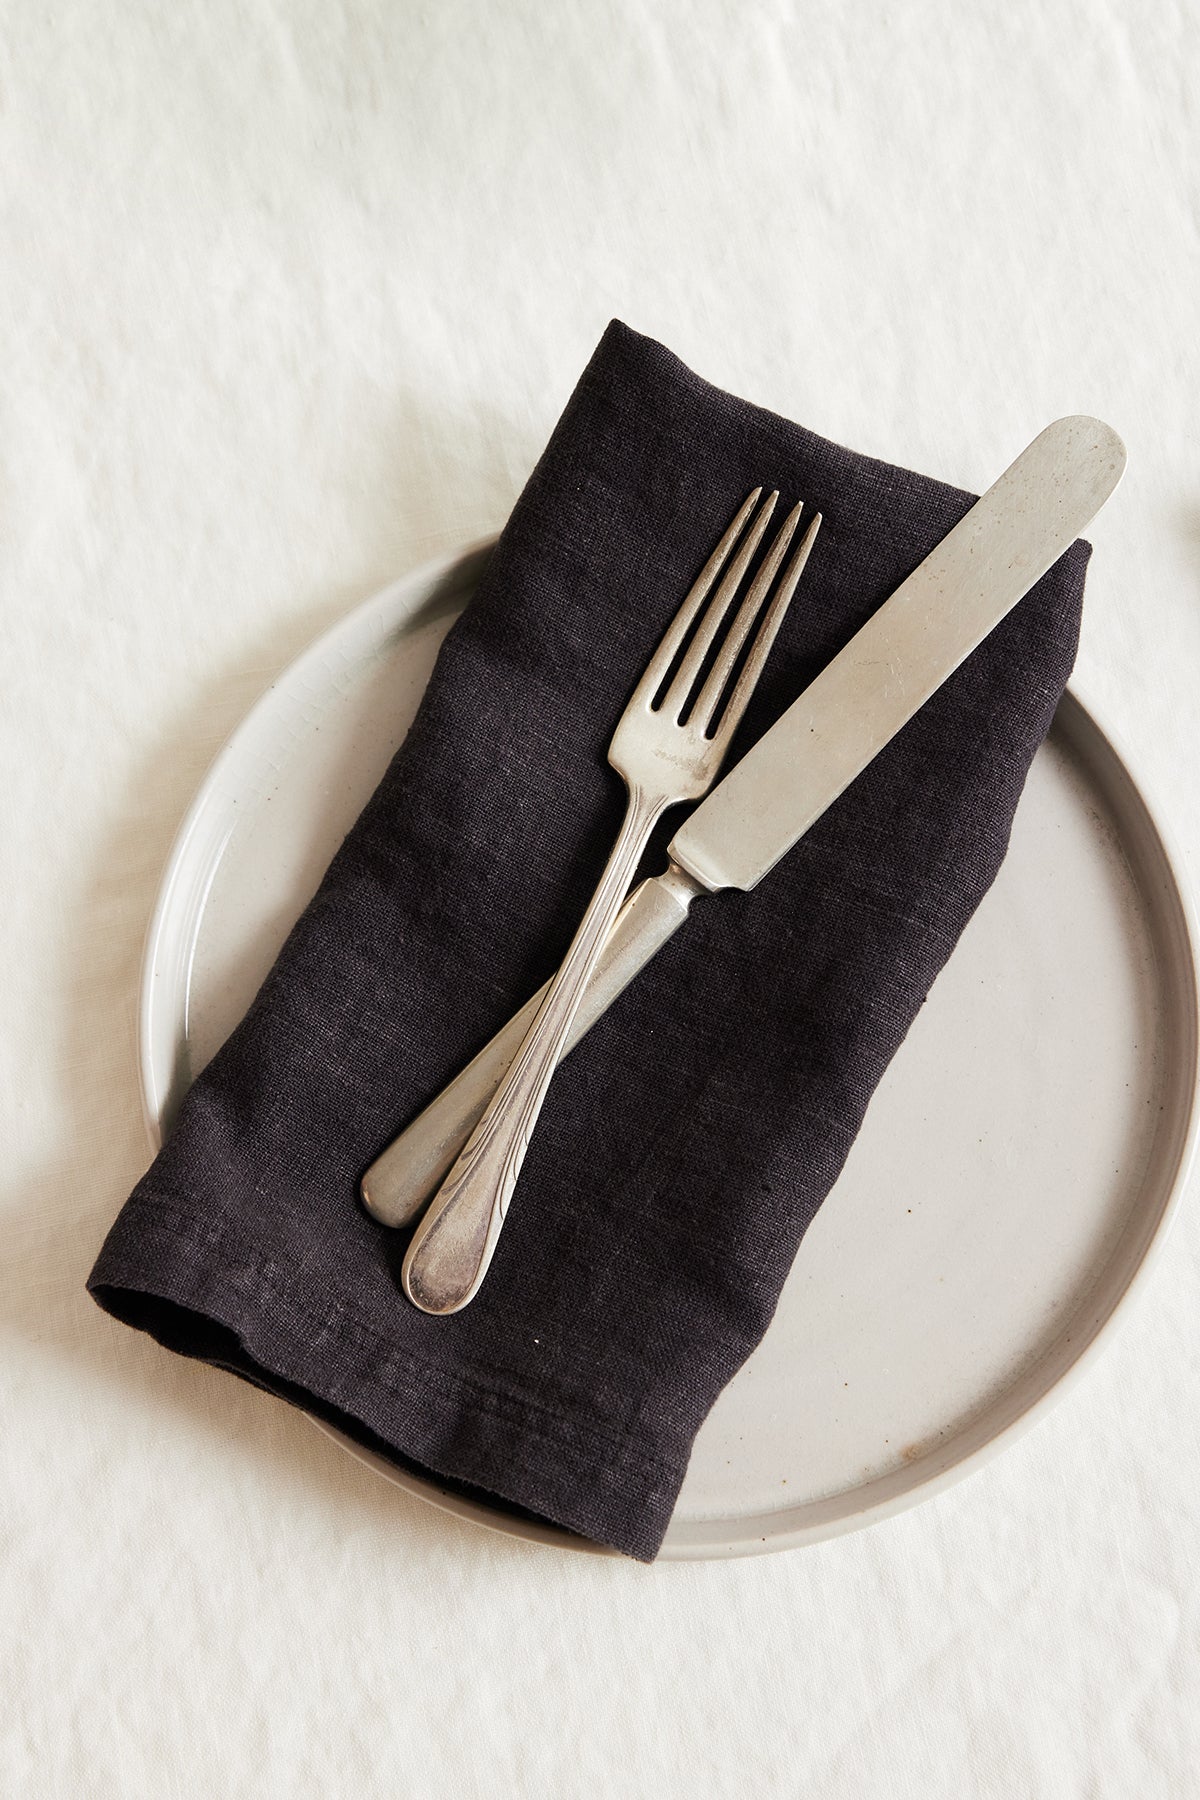   Jenny Graham Home linen napkin with fork and knife on a white plate, an everyday kitchen essential with a luxe finish. 